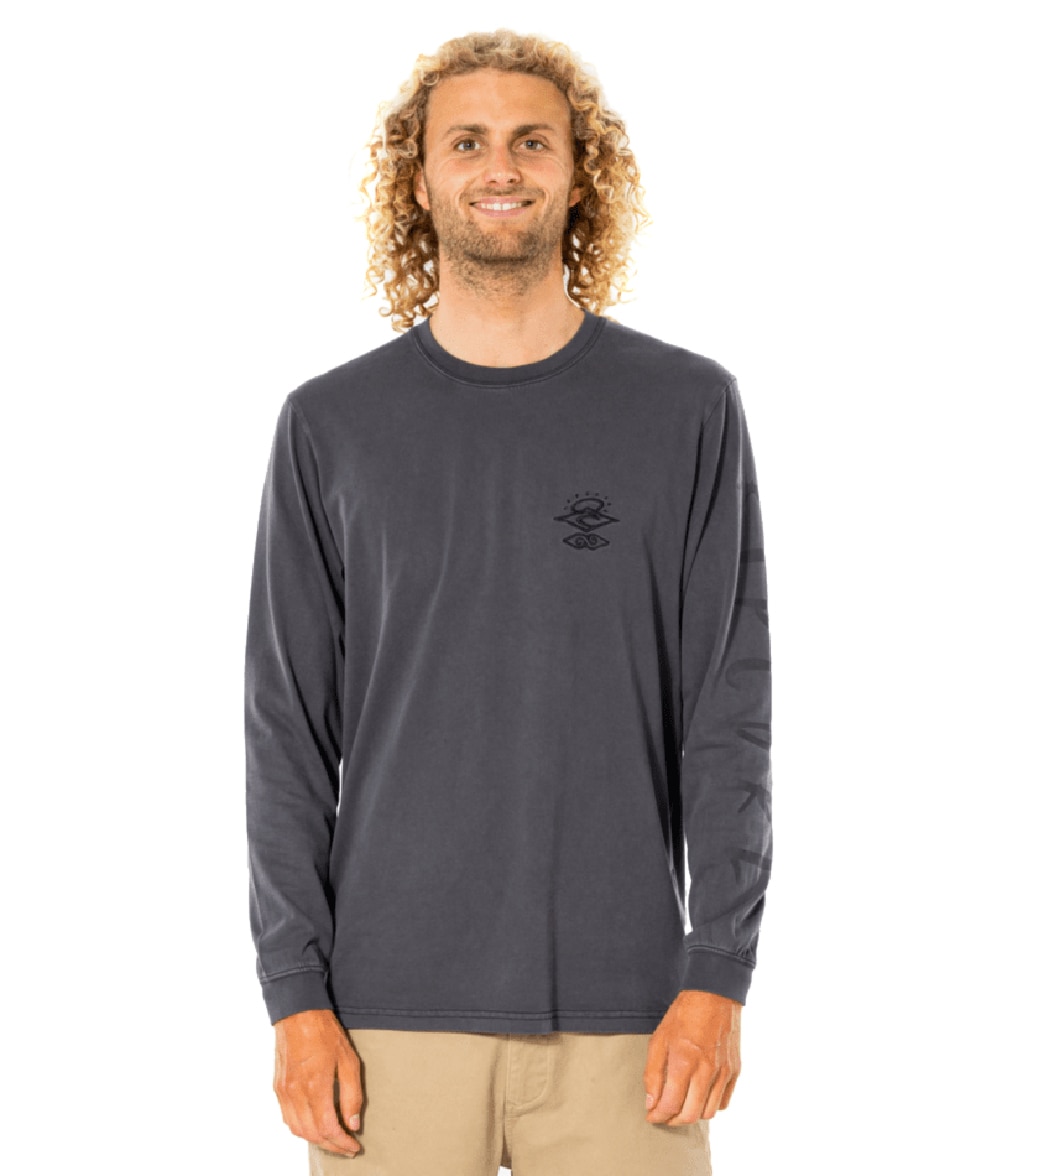 Rip Curl Men's Searchers Sea Lice Long Sleeve Tee Shirt - Washed Black Large Cotton - Swimoutlet.com